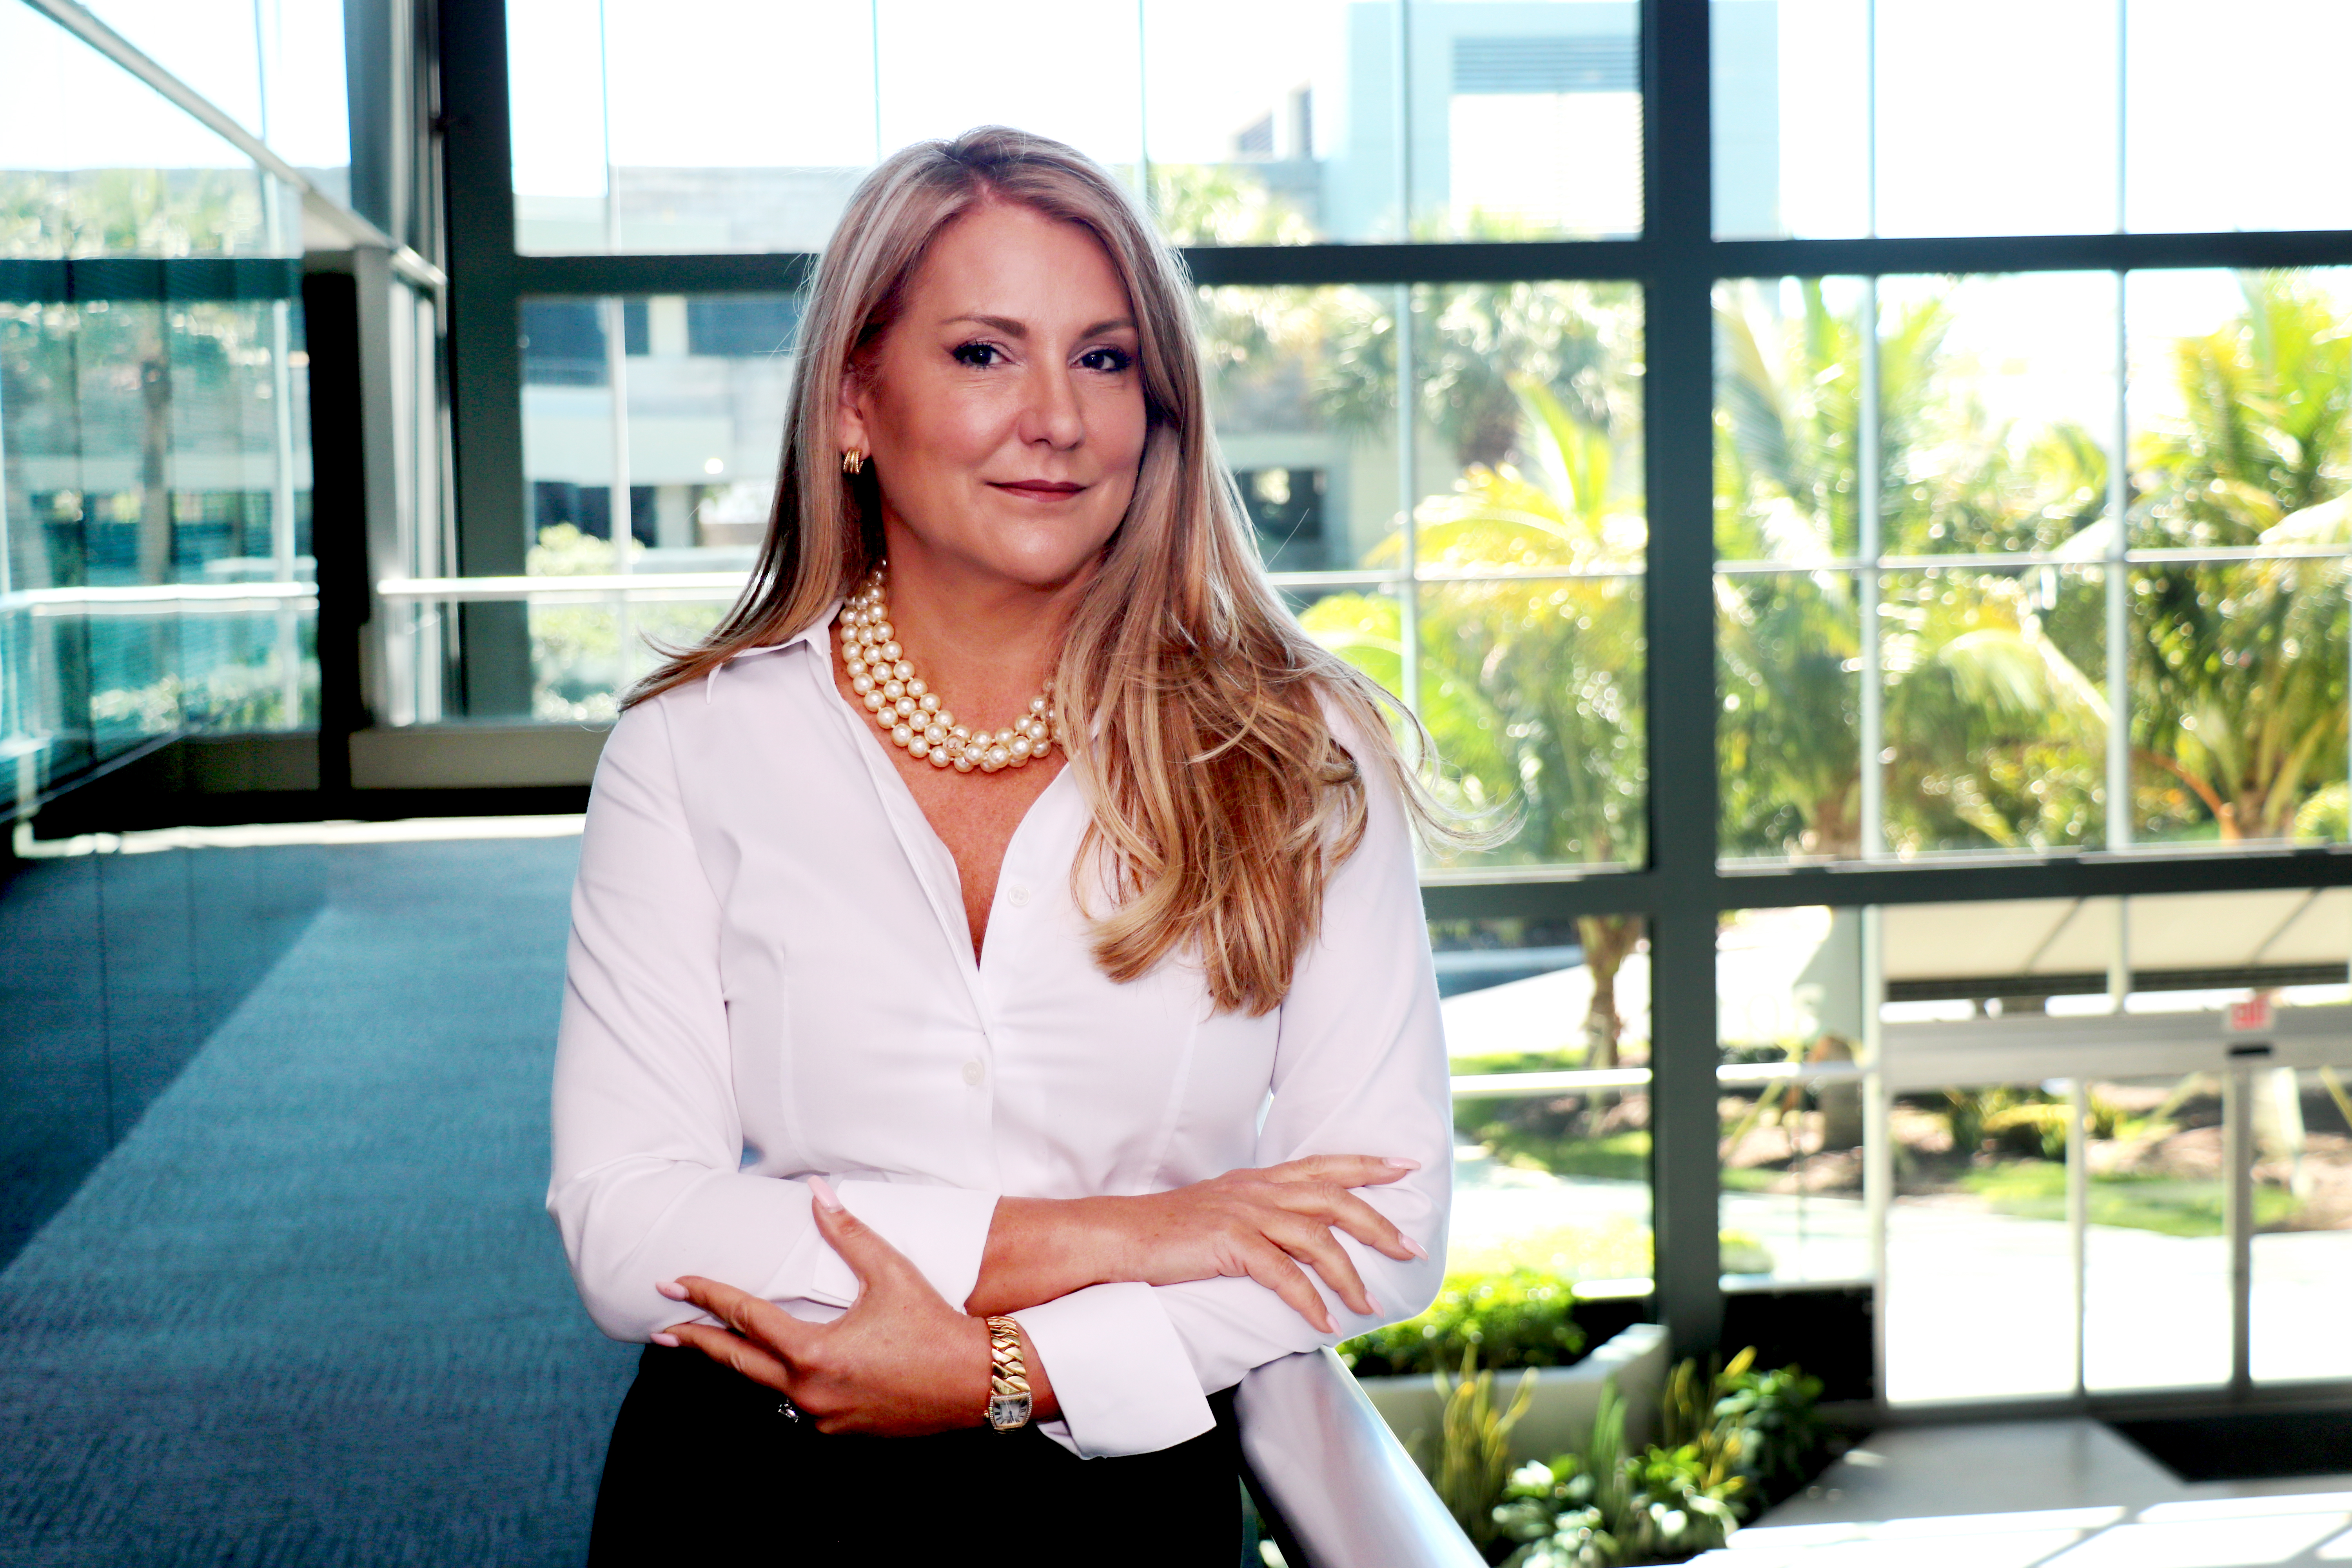 South Florida Attorney Doreen Yaffa Makes the Case for Compassion in Family Law